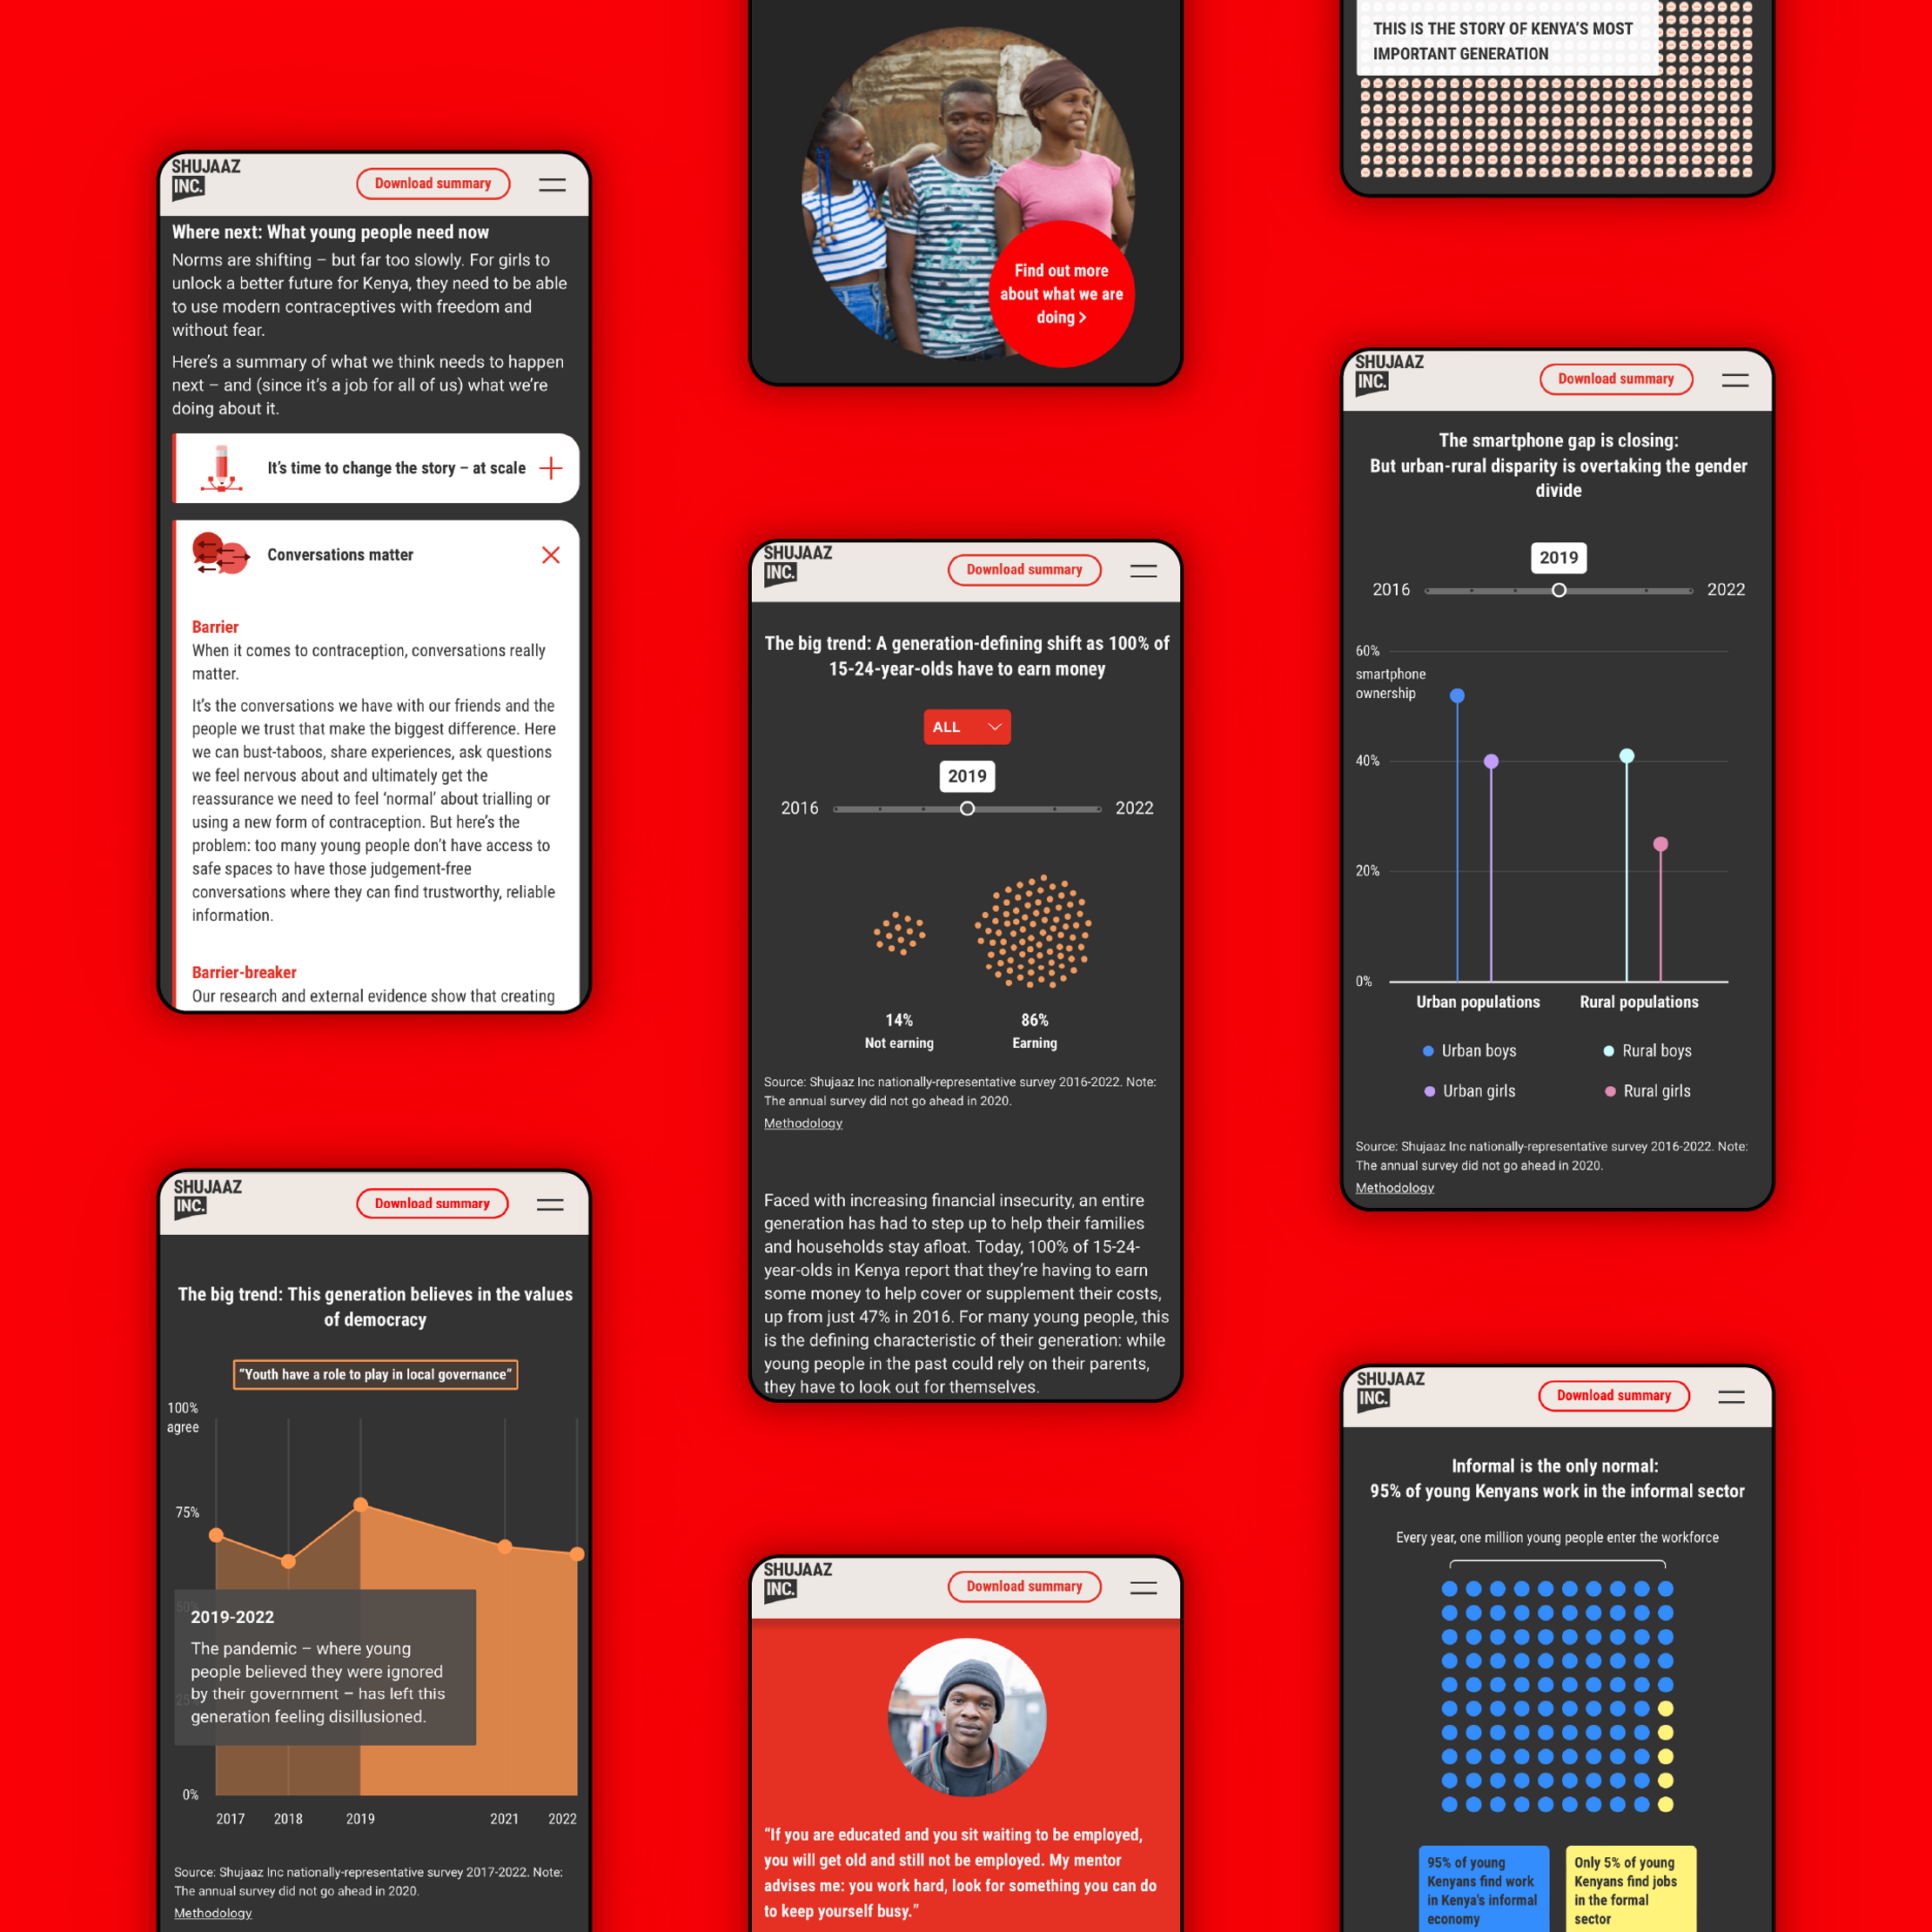 Several mobile screenshots of the 'generation of who can transform Kenya' story. The sceenshots are a mix of data visualizations, text and photography.